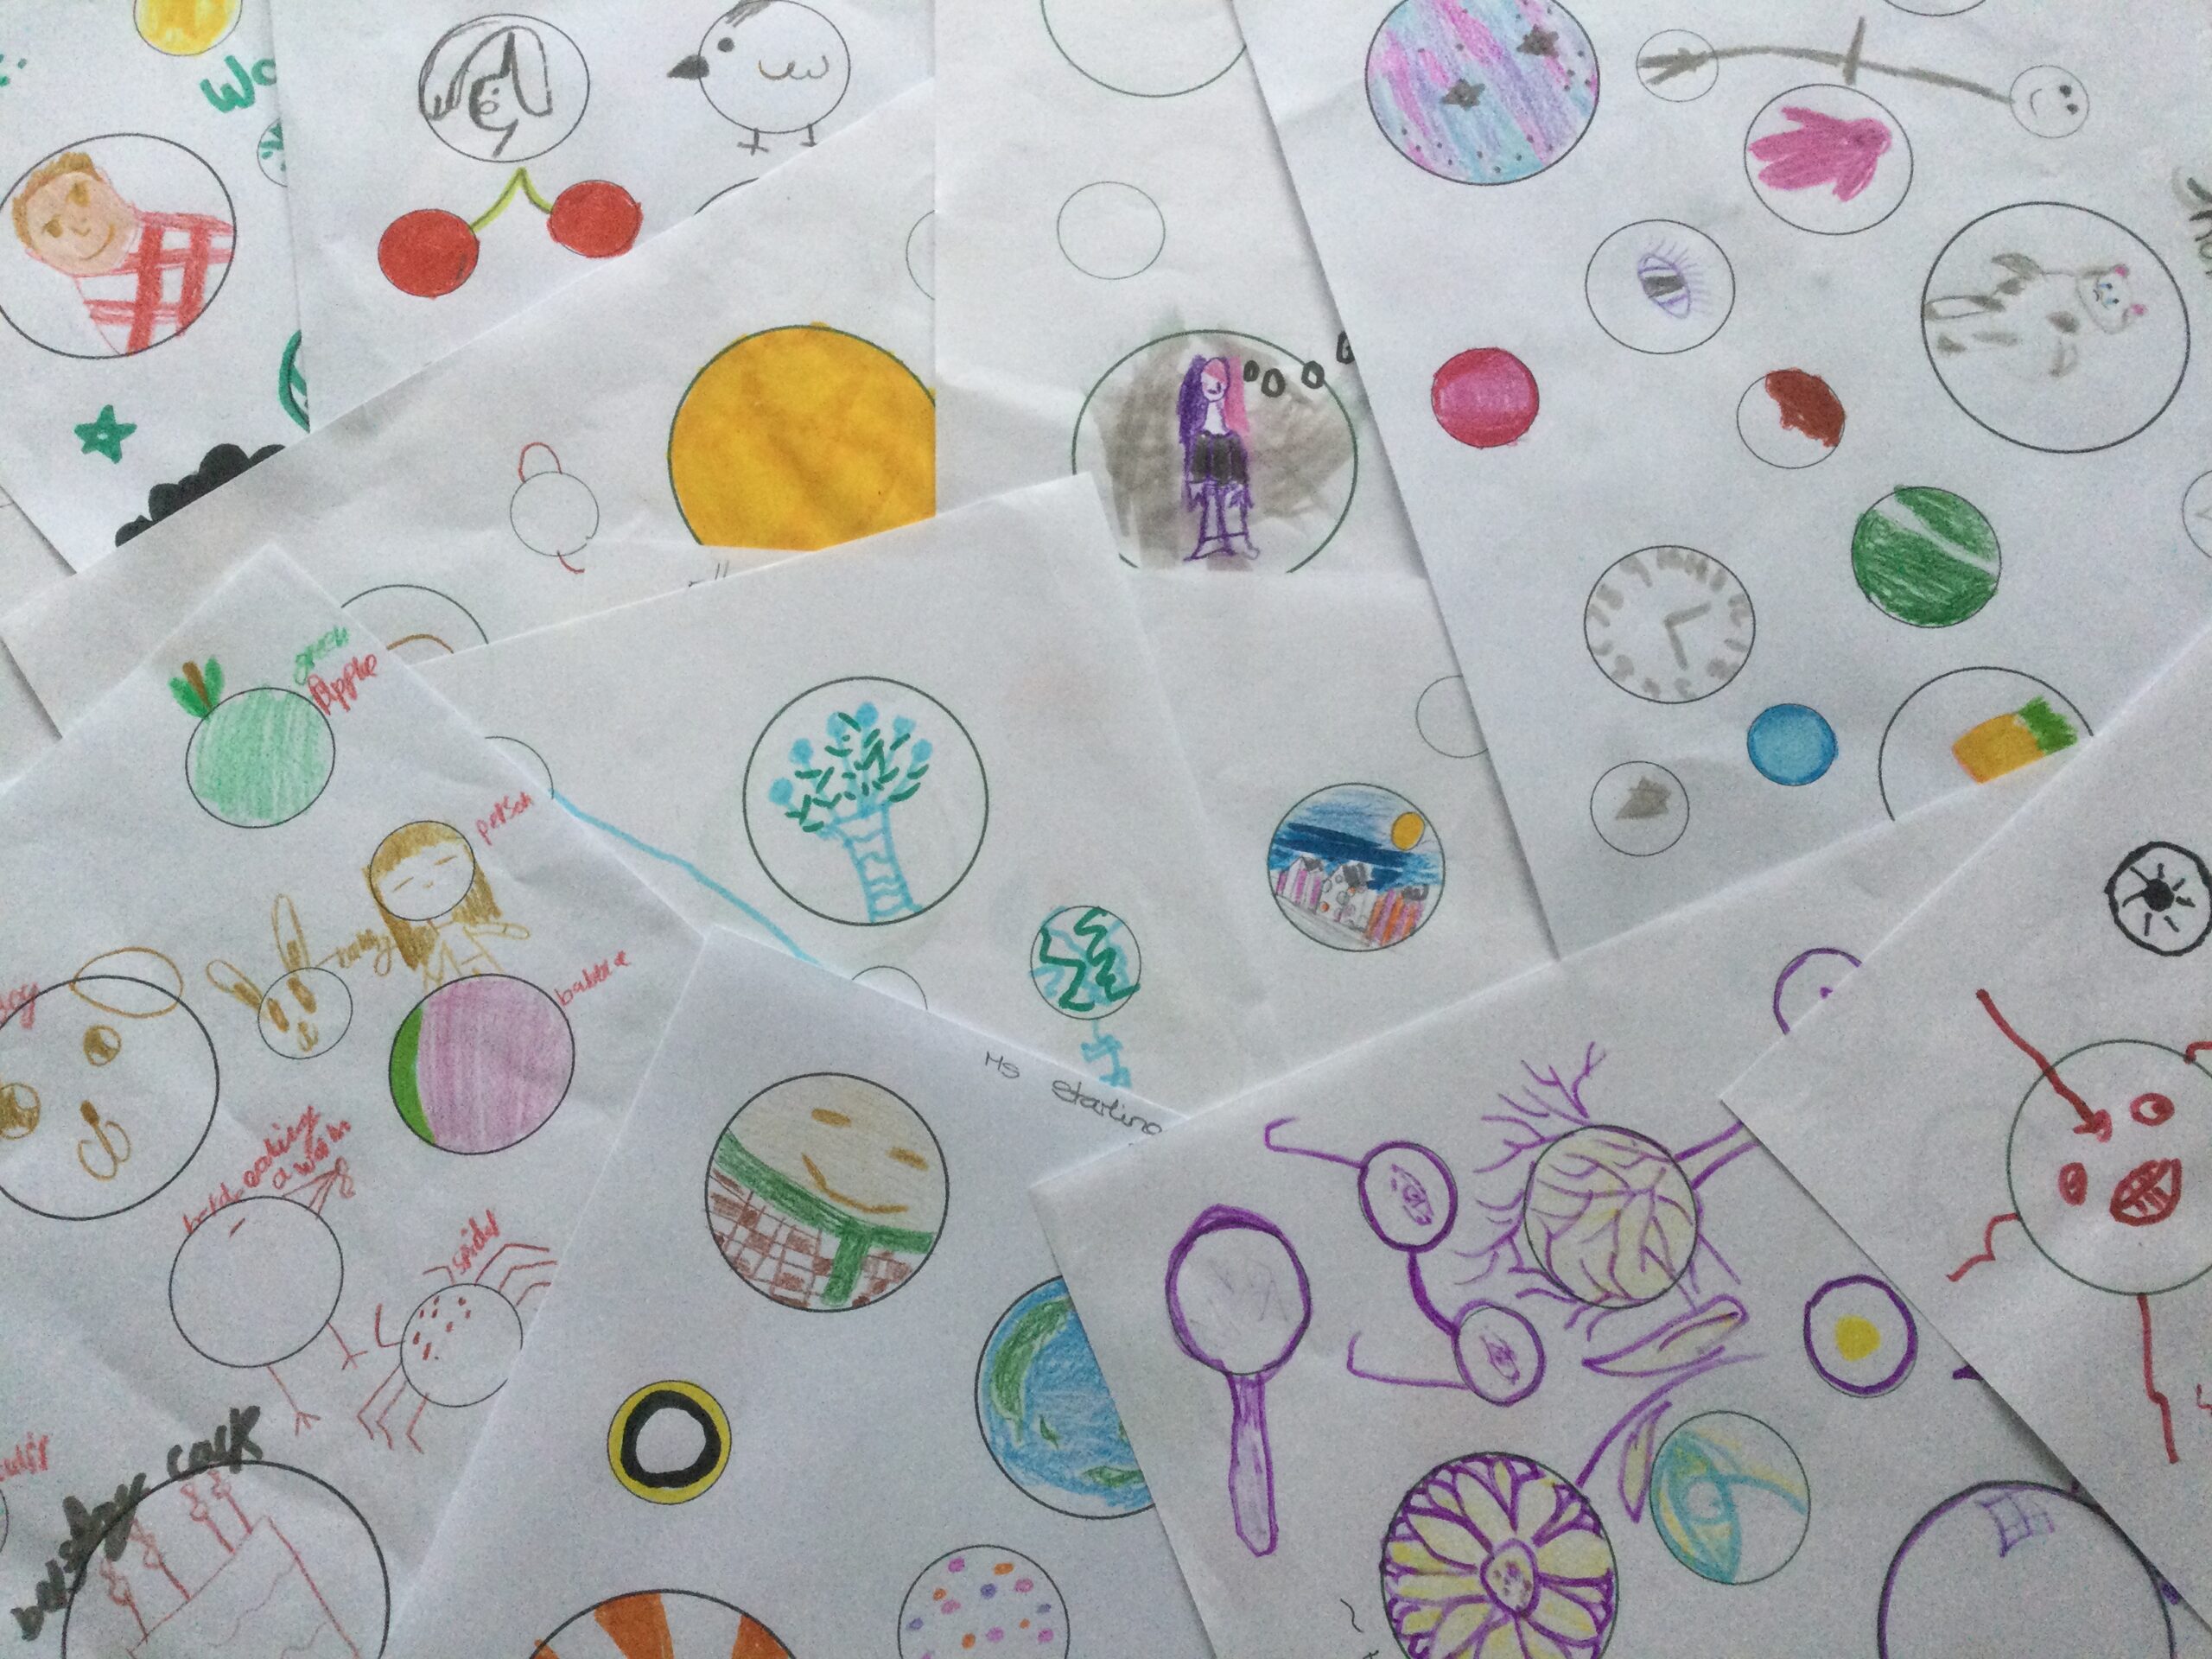 Overlaid sheets of paper printed with different sized circles, many of which have been decorated and redrawn as objects such as spectacles, cherries and clock faces